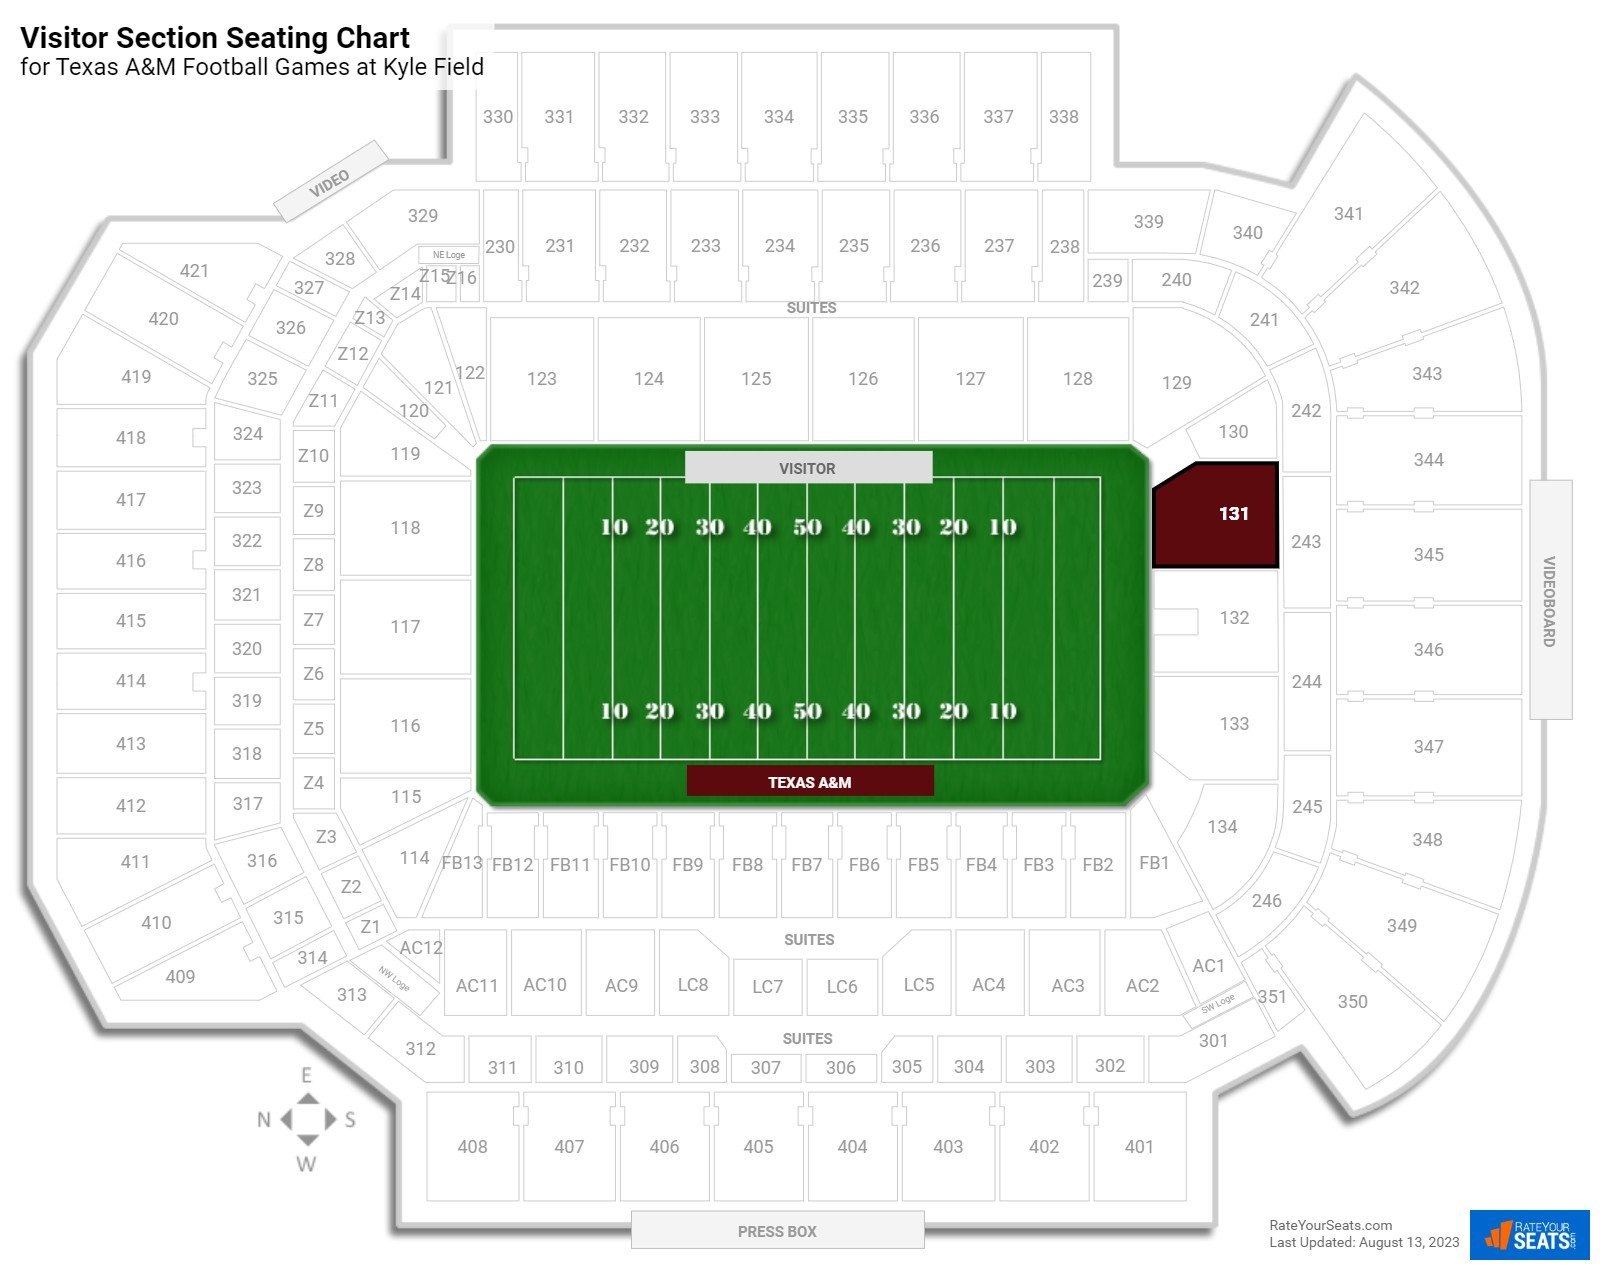 Texas A&M Visitor Section Seating Chart at Kyle Field